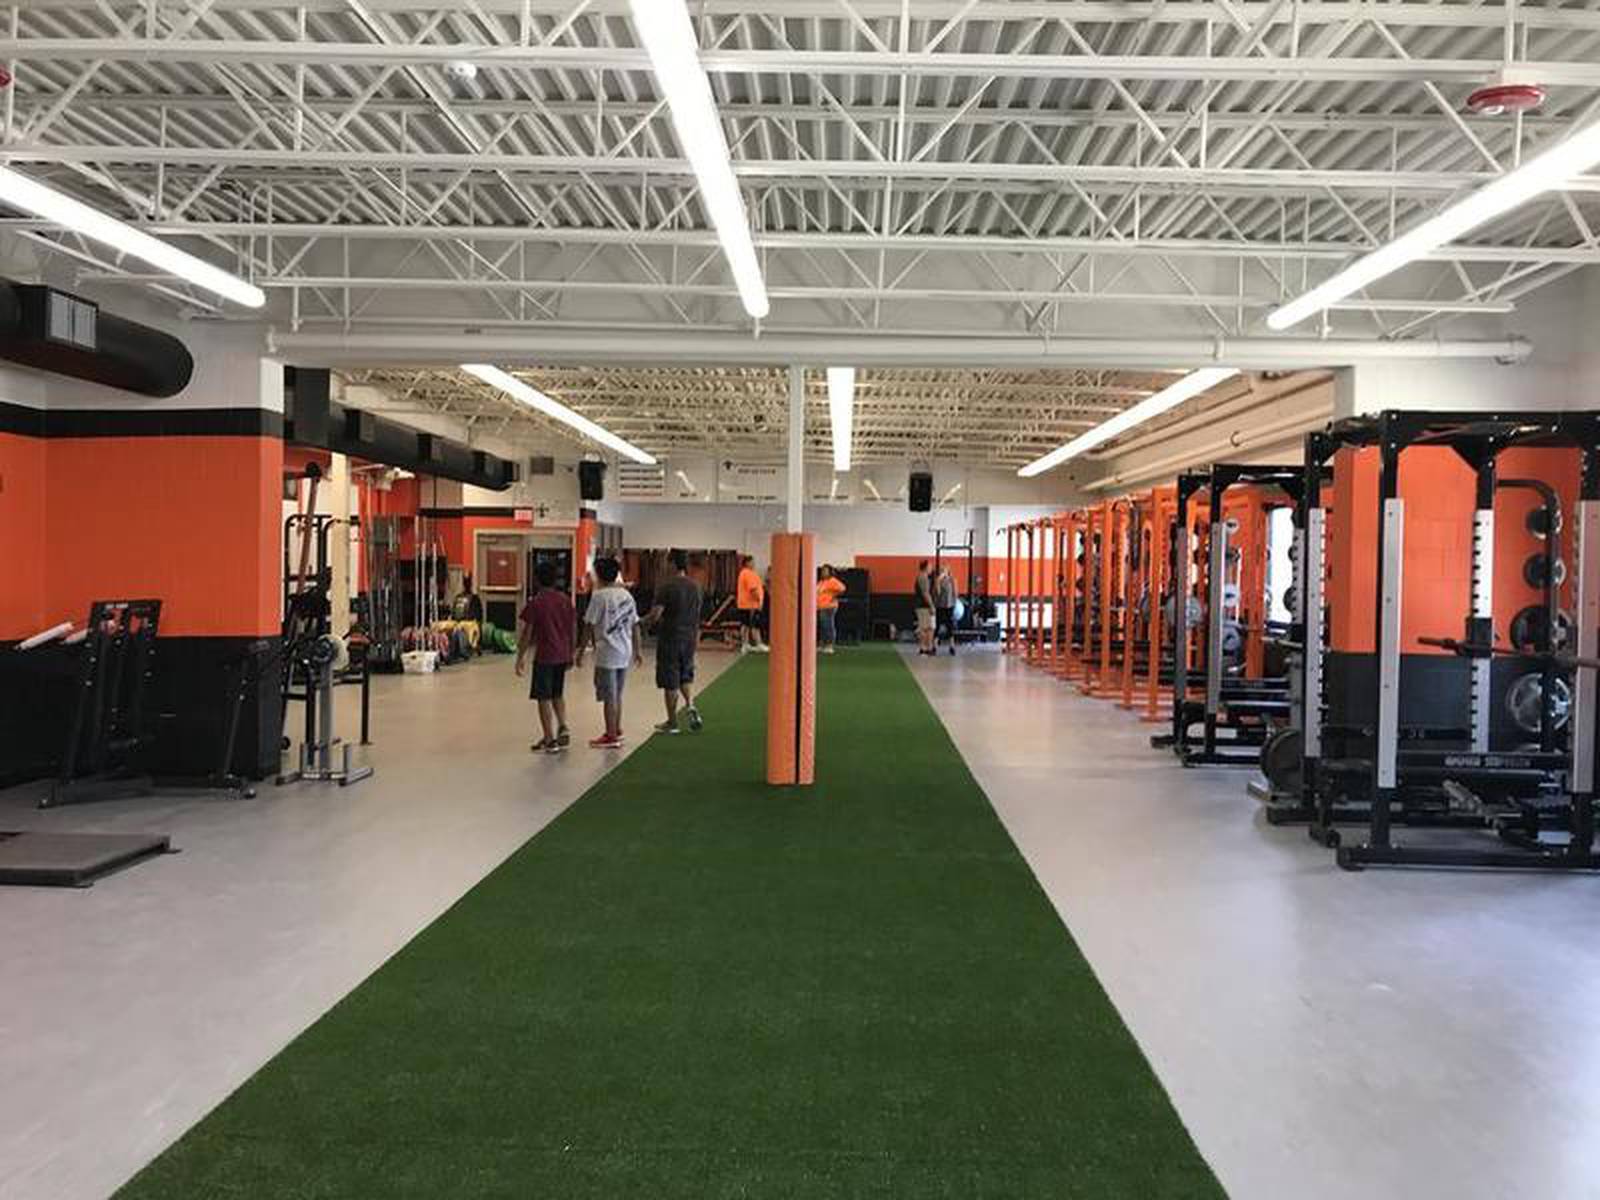 St. Charles East unveils athletics facilities improvements Shaw Local